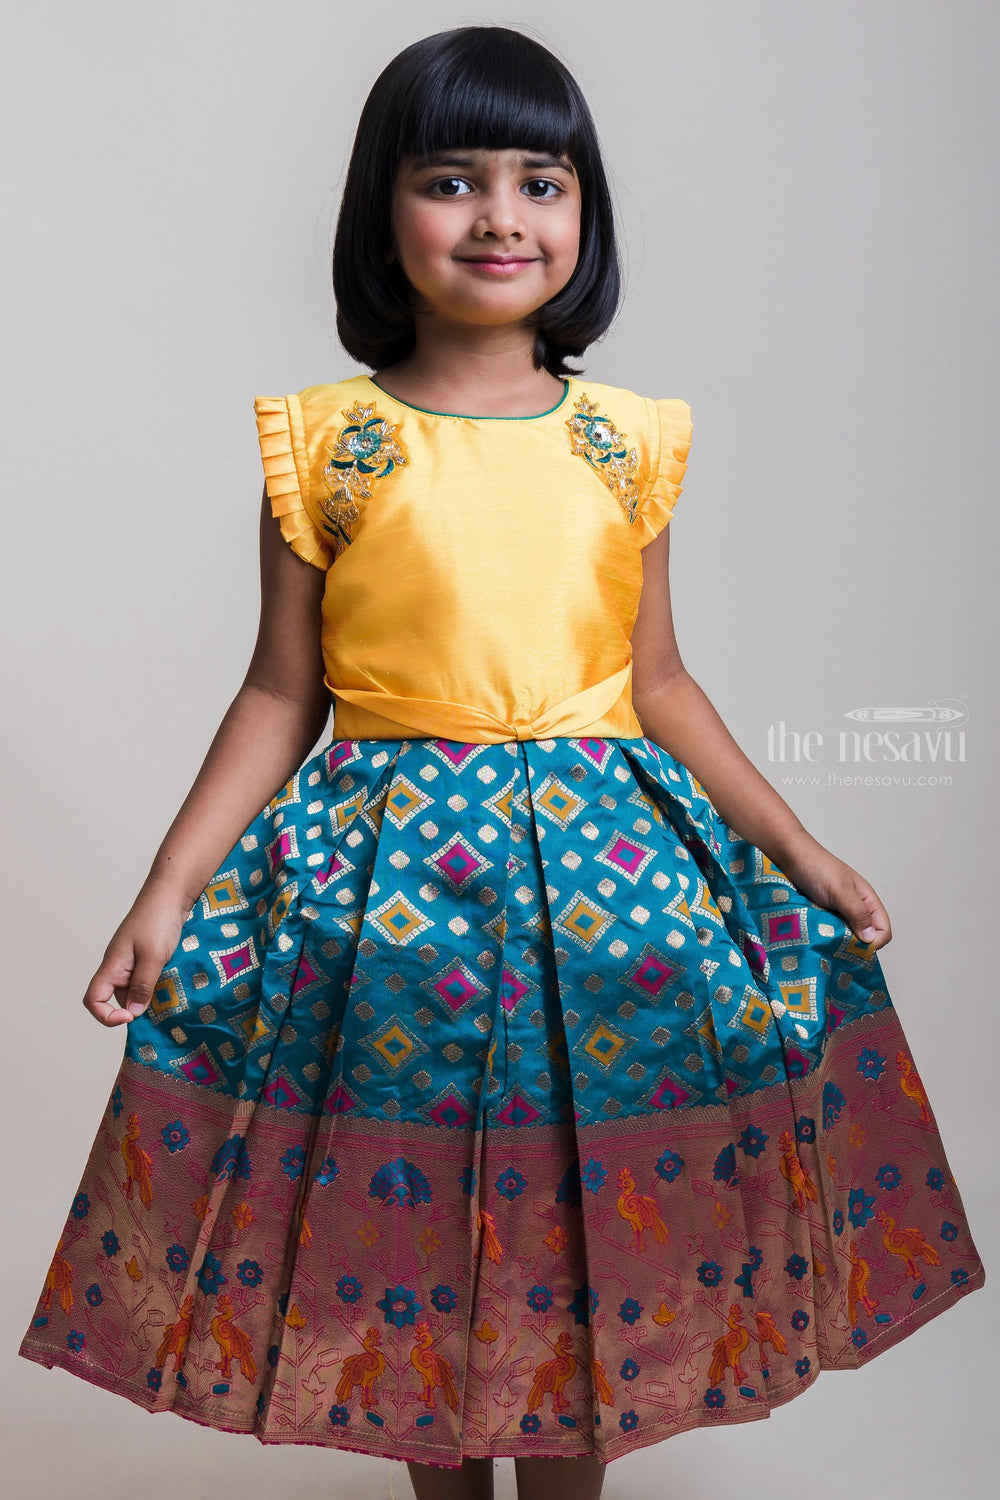 The Nesavu Silk Party Frock Embroidered Yellow Yoke And Copper-Toned Zari Border Silk Frocks For Girls Nesavu Ruffled Sleeves Silk Frock Collection| Pongal Special Arrival| The Nesavu